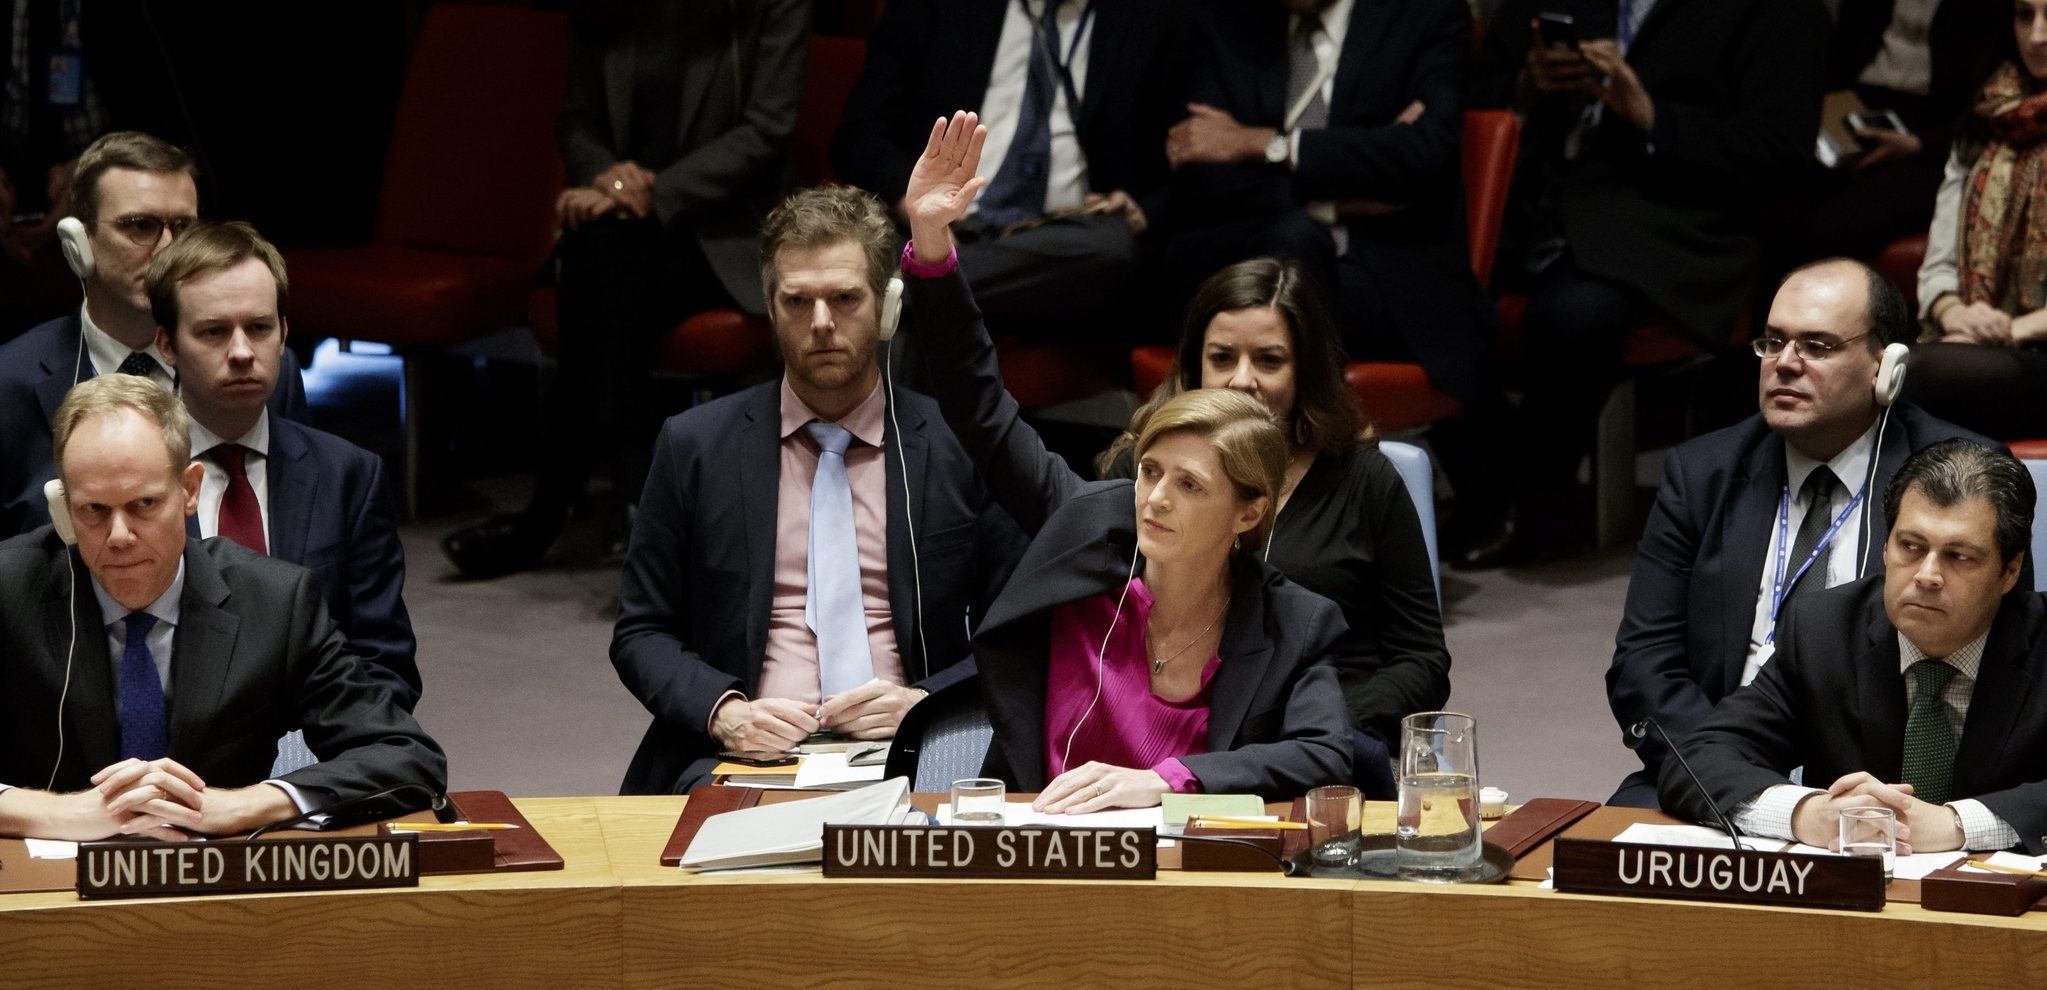  Samantha Power (C), the United States' Permanent Representative to the United Nations, votes to abstain from voting on a resolution condemning Israeli settlement construction. (EPA Photo)